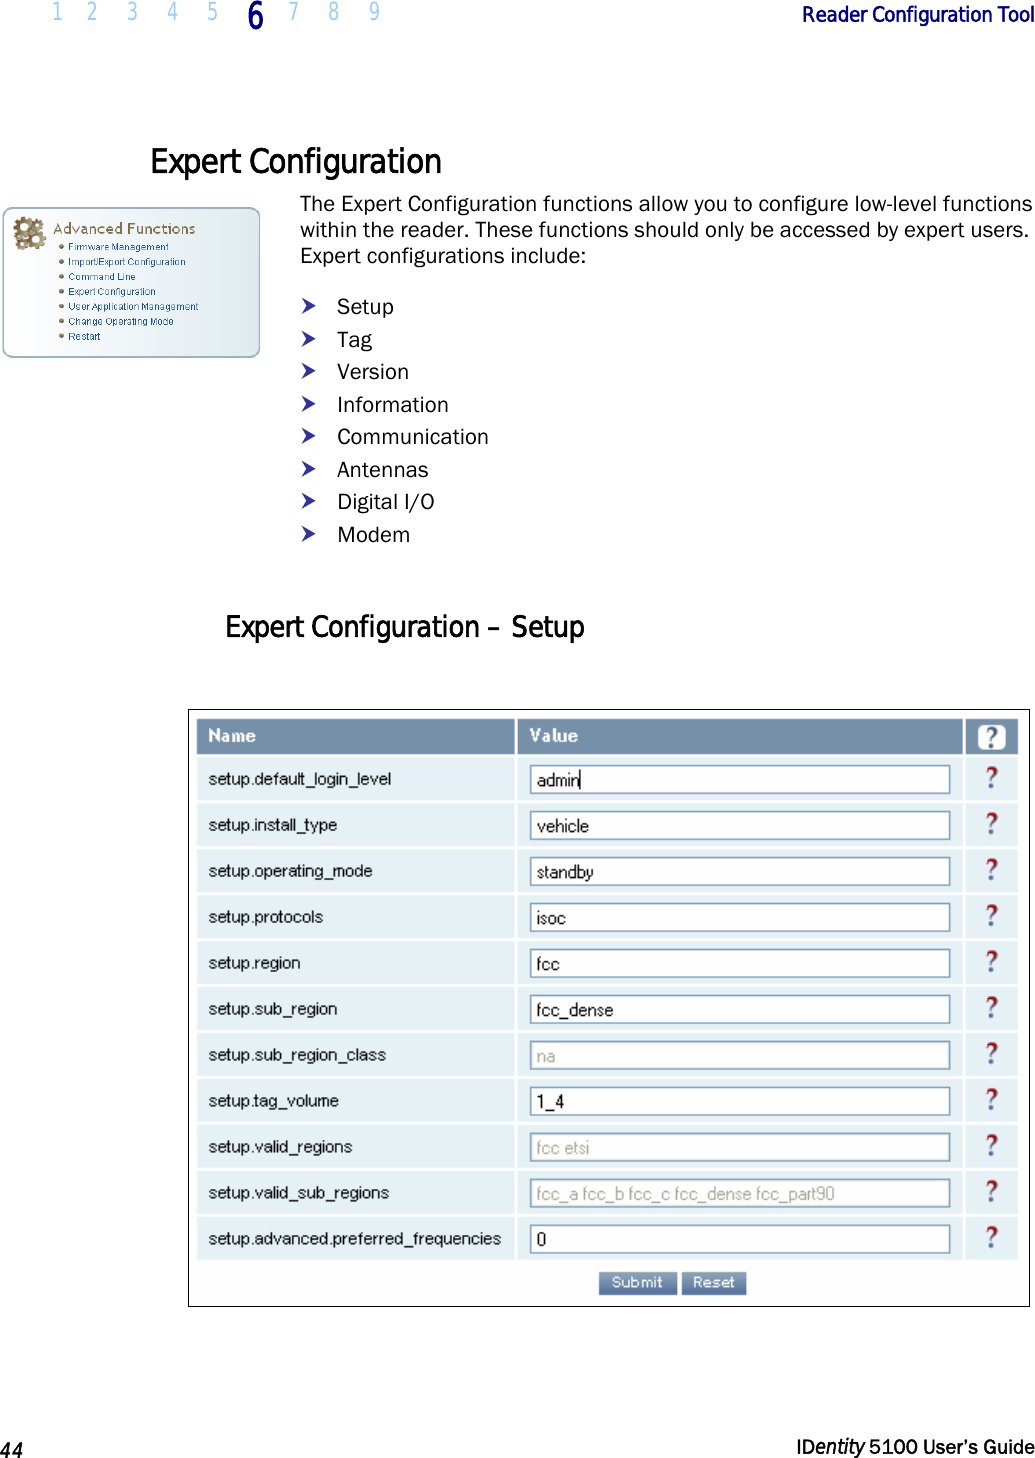  1 2  3  4  5 6 7 8 9       Reader Configuration Tool   44  IDentity 5100 User’s Guide  Expert Configuration The Expert Configuration functions allow you to configure low-level functions within the reader. These functions should only be accessed by expert users. Expert configurations include: h Setup h Tag h Version h Information h Communication h Antennas h Digital I/O h Modem  Expert Configuration – Setup     